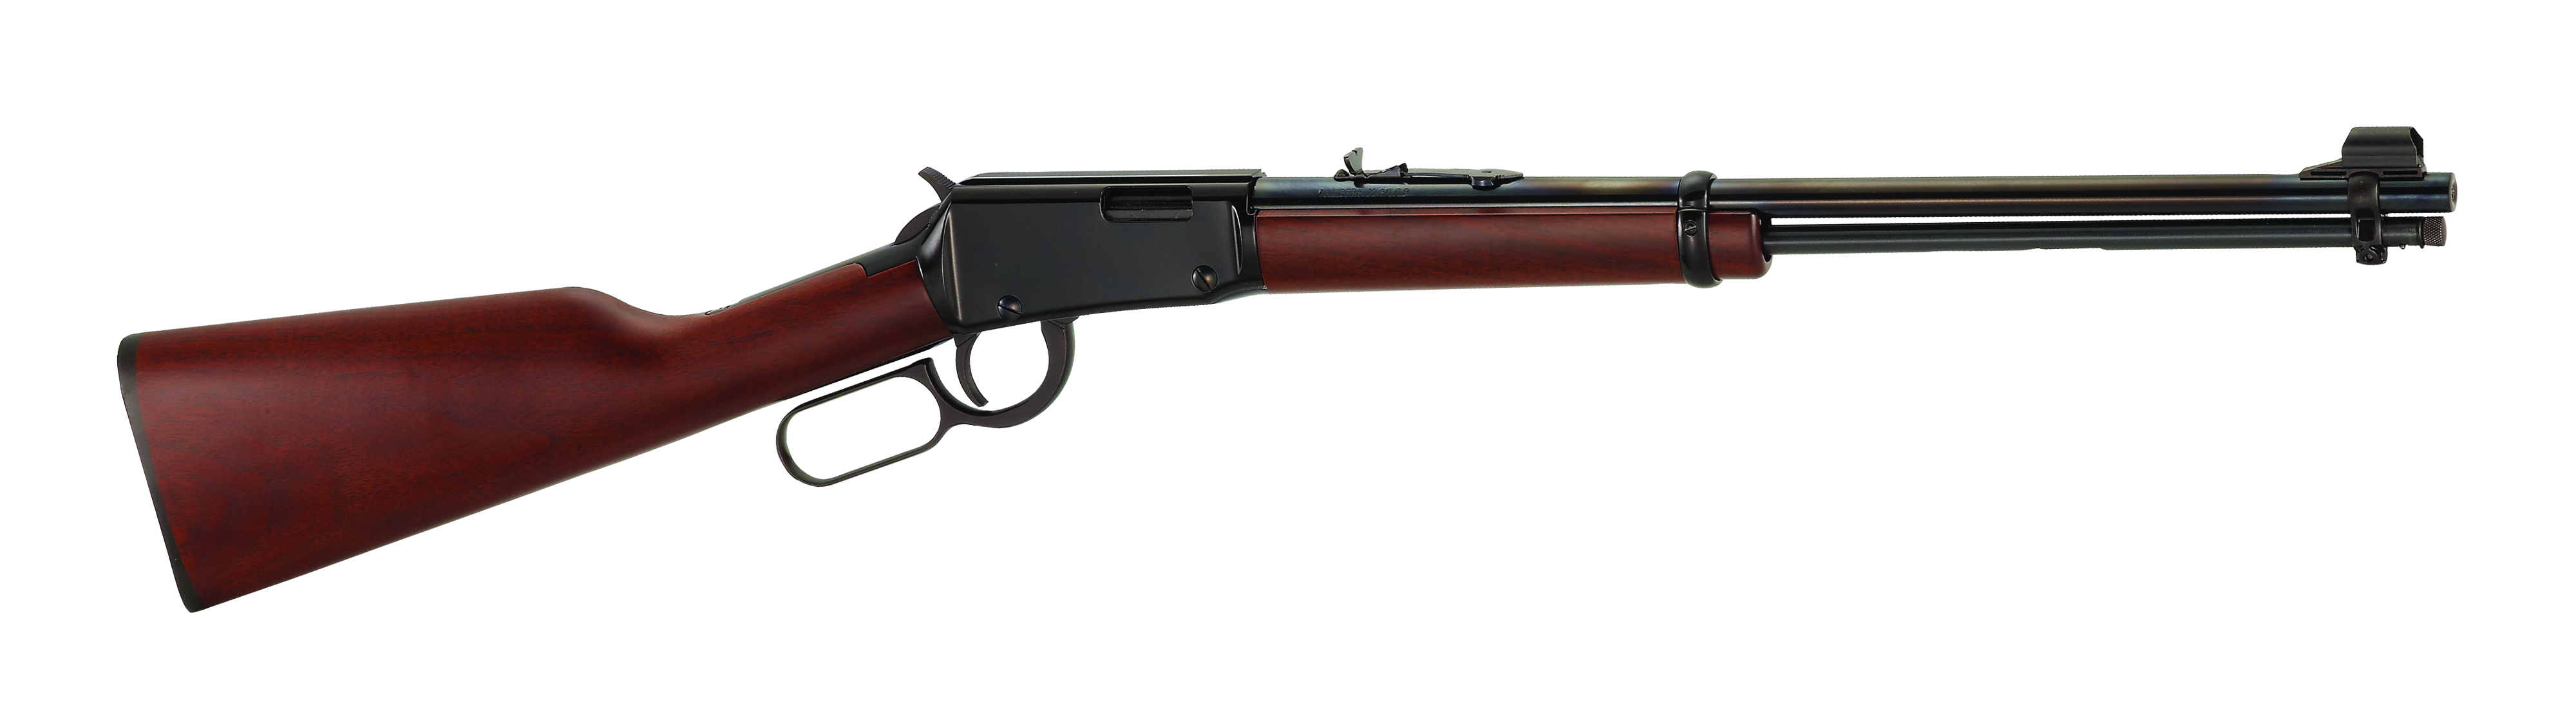 Classic Lever Action